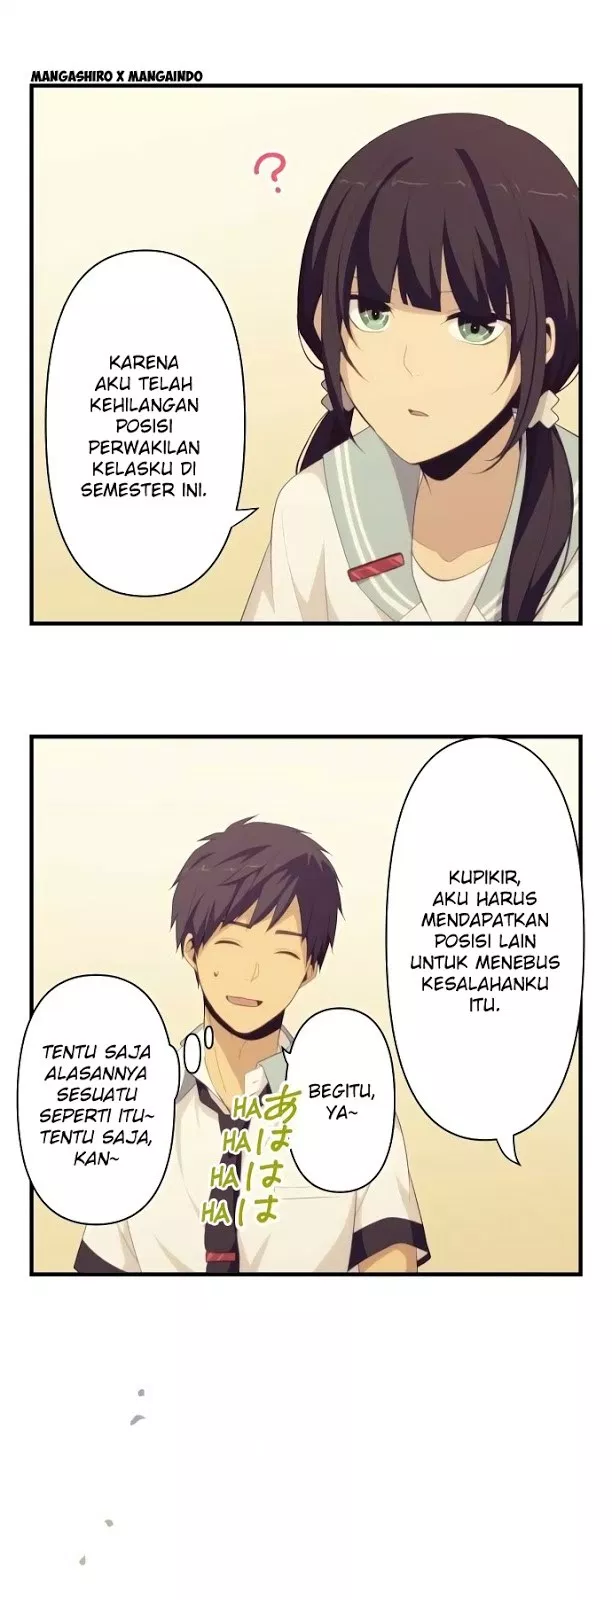 ReLIFE Chapter 128